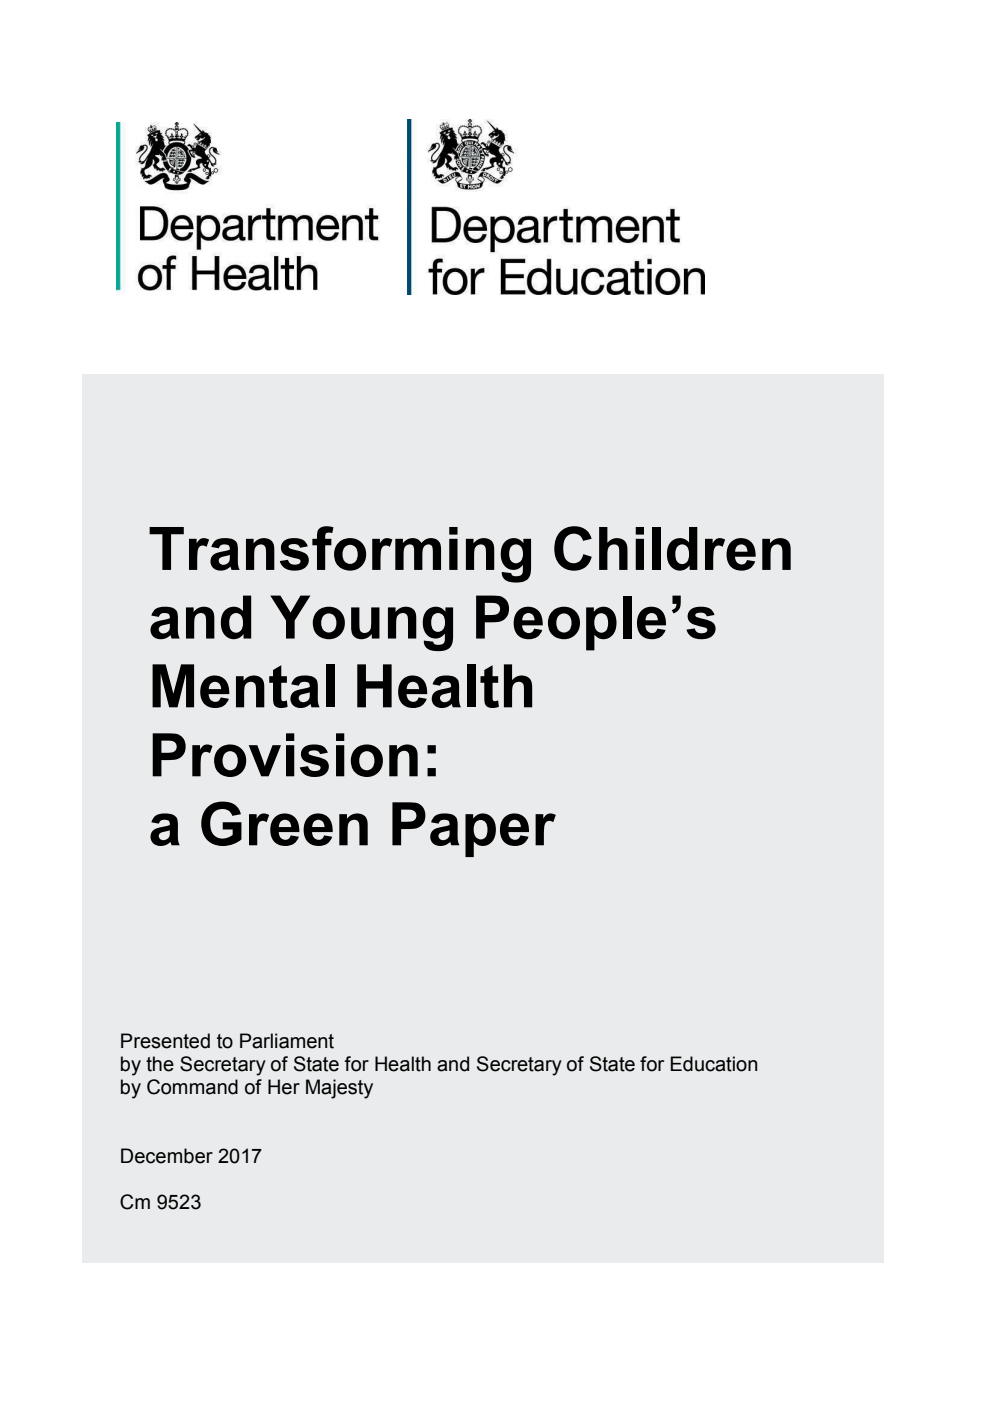 Transforming Children and Young People’s Mental Health Provision: a Green Paper